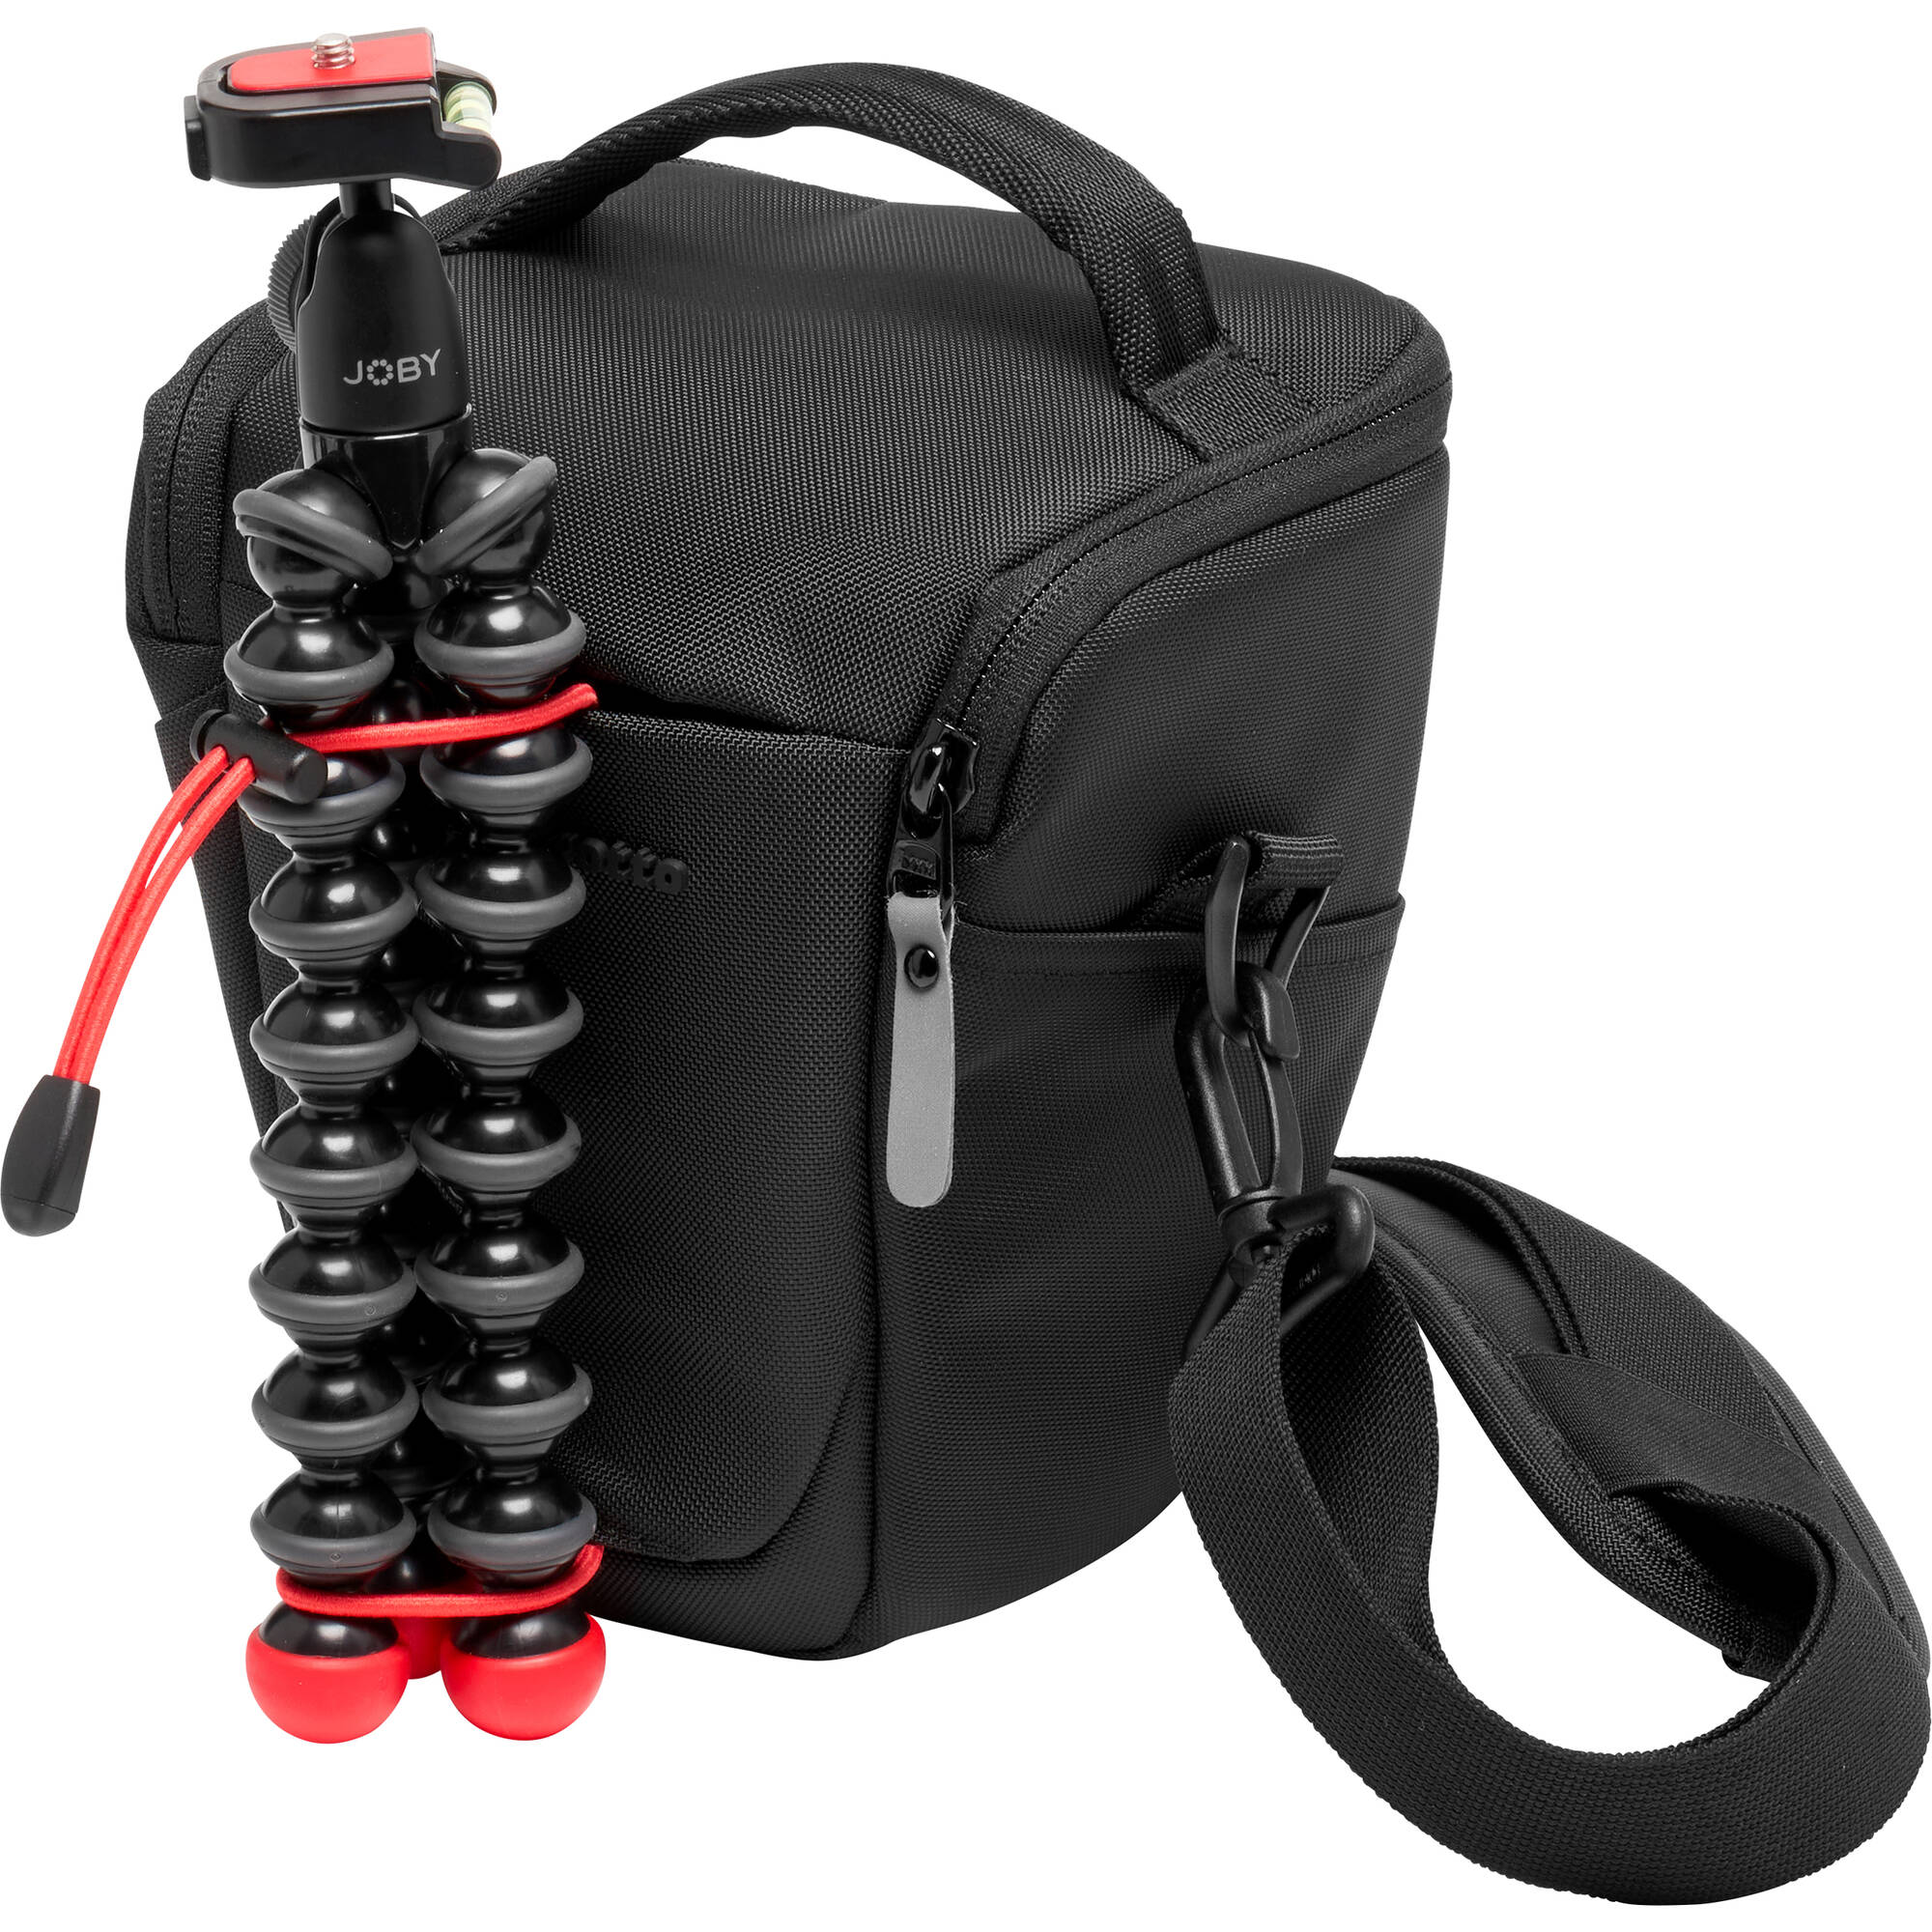 Manfrotto bag.  ADVANCED HOLSTER S III